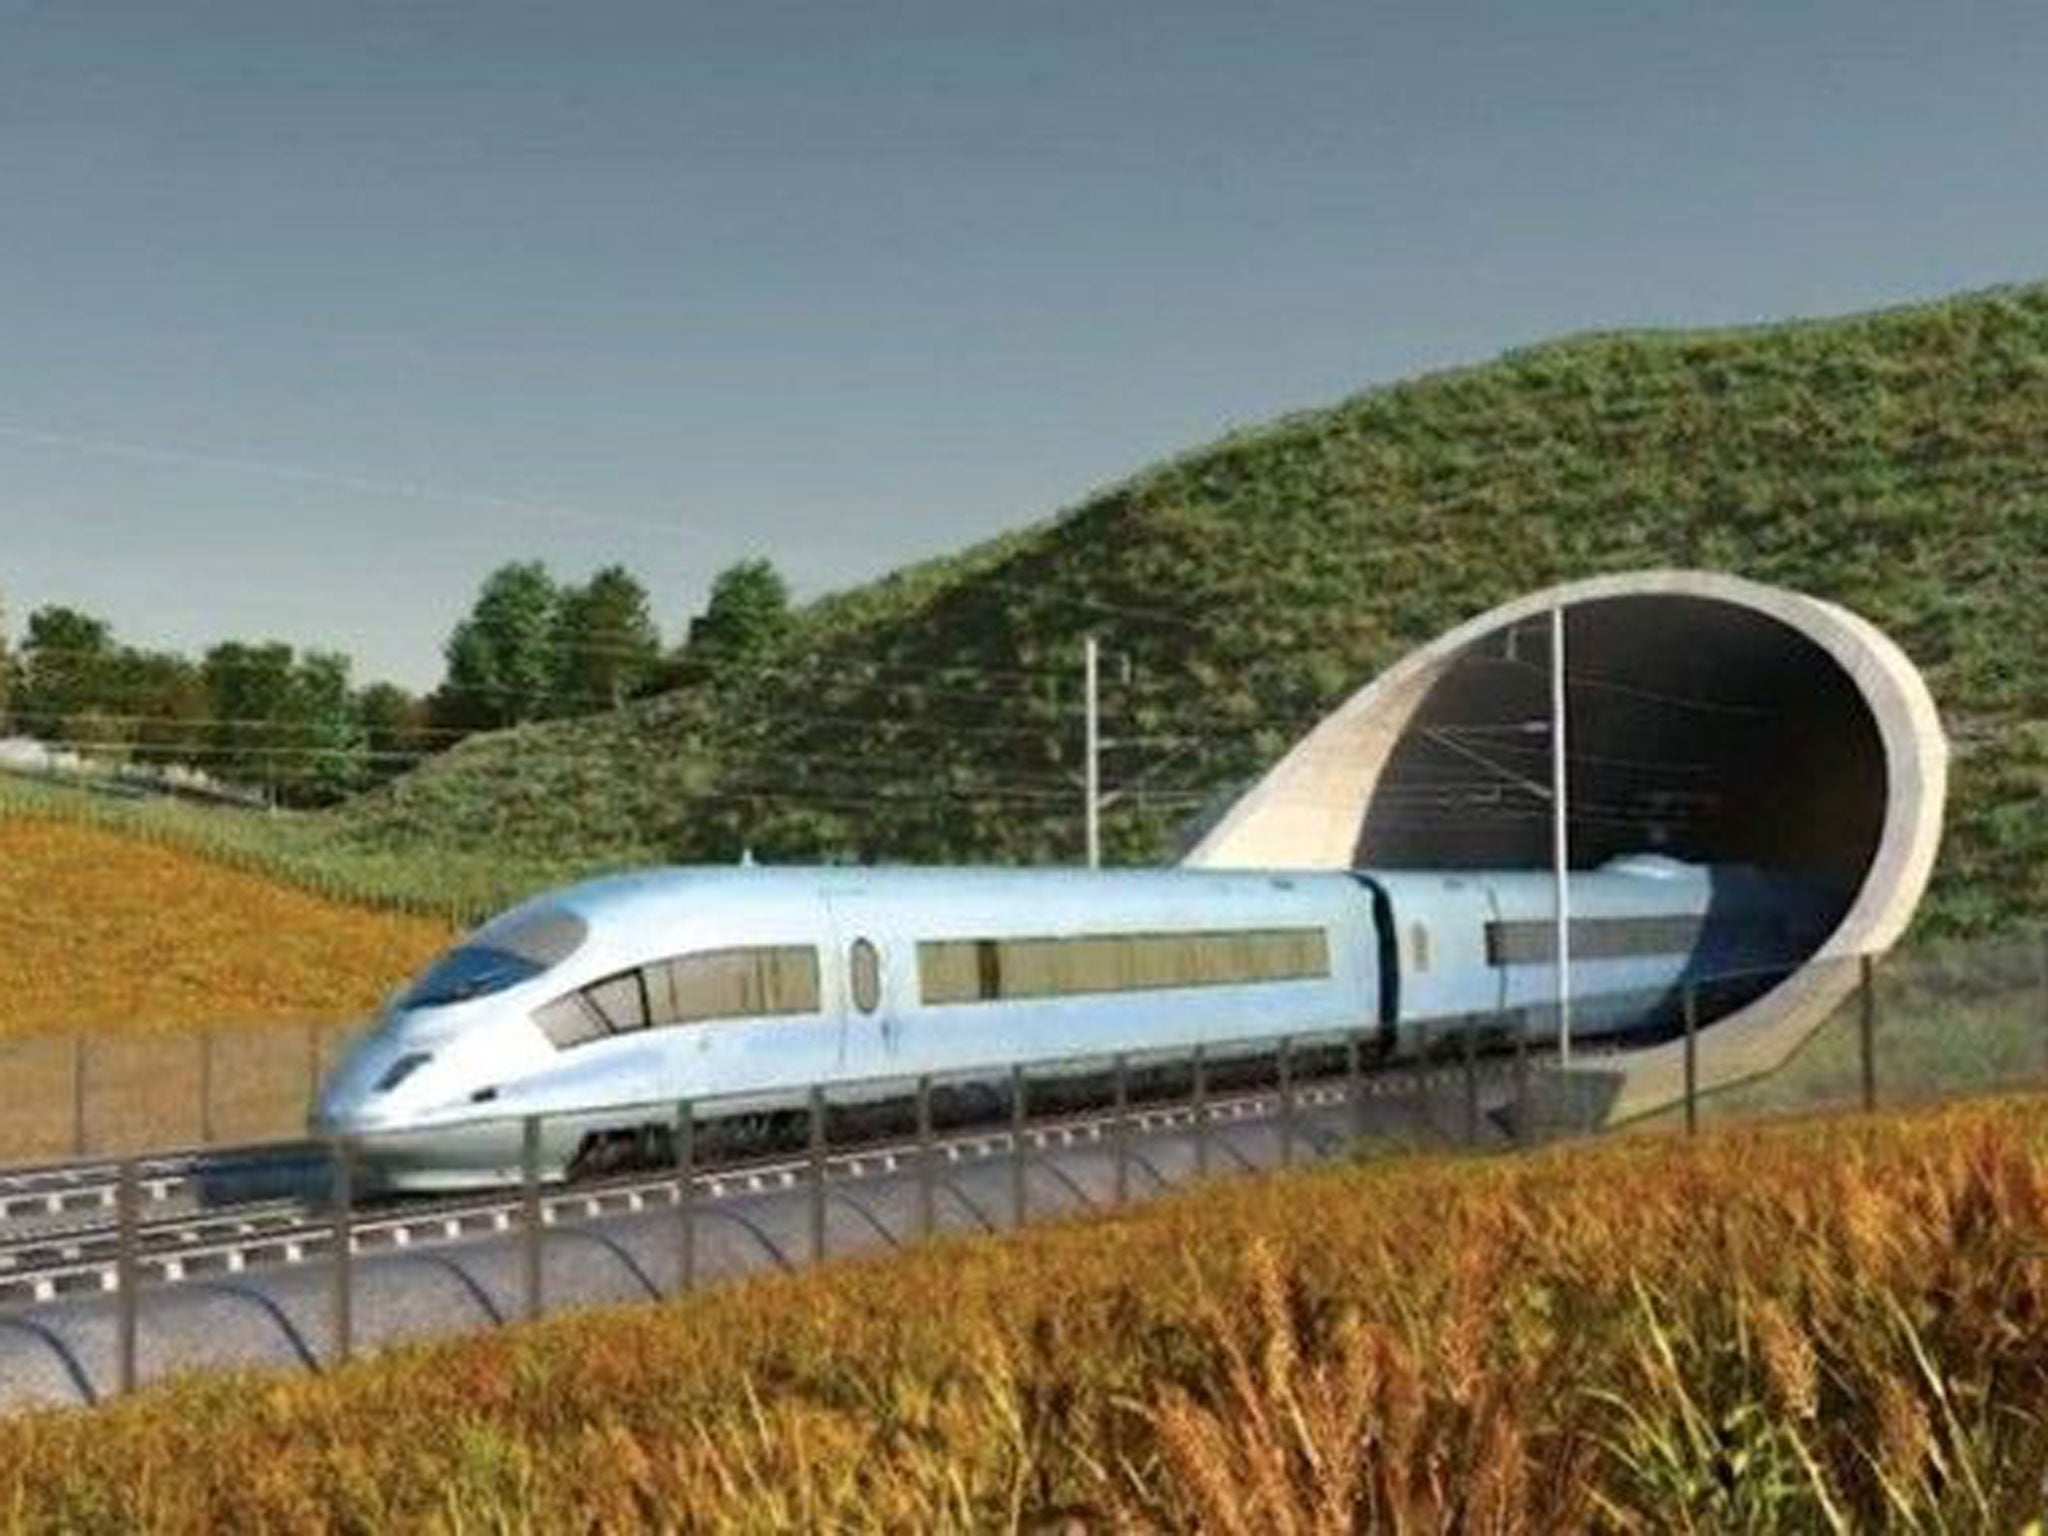 The £21.4bn-budget first phase, between London and Birmingham, reduces the journey time to 49 minutes, and is due for completion by 2026